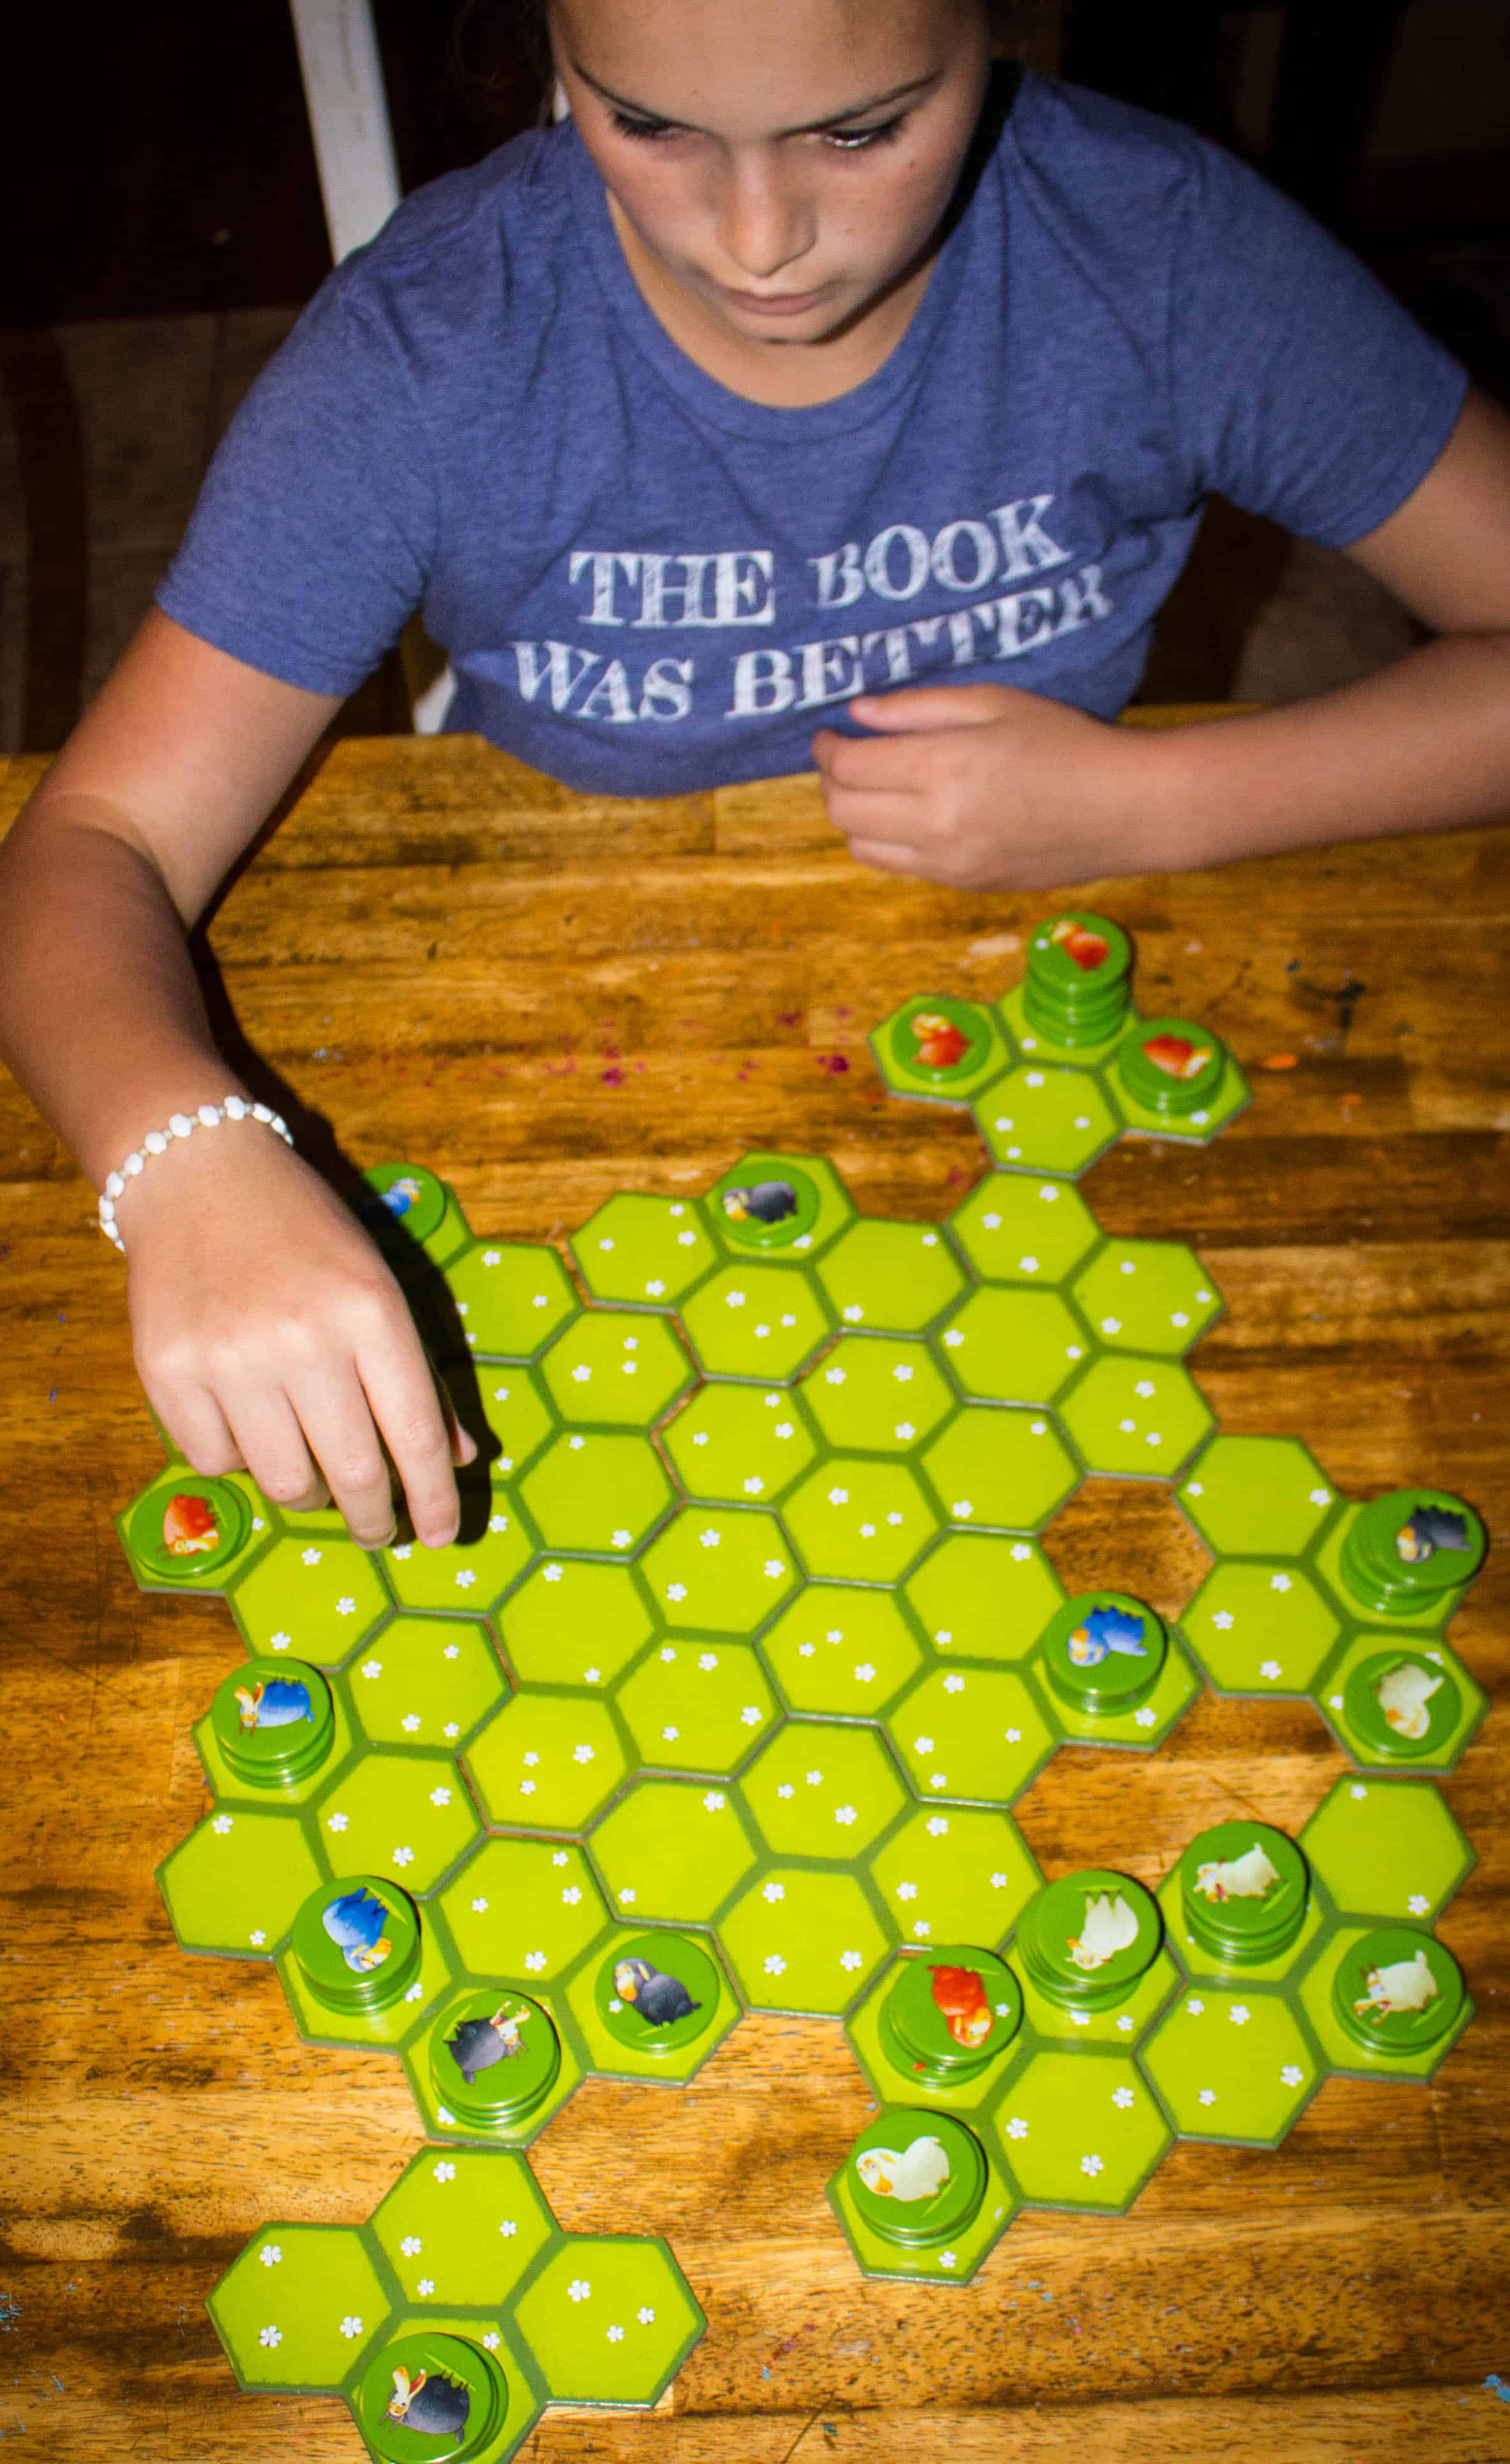 Family game night has never been so fun!